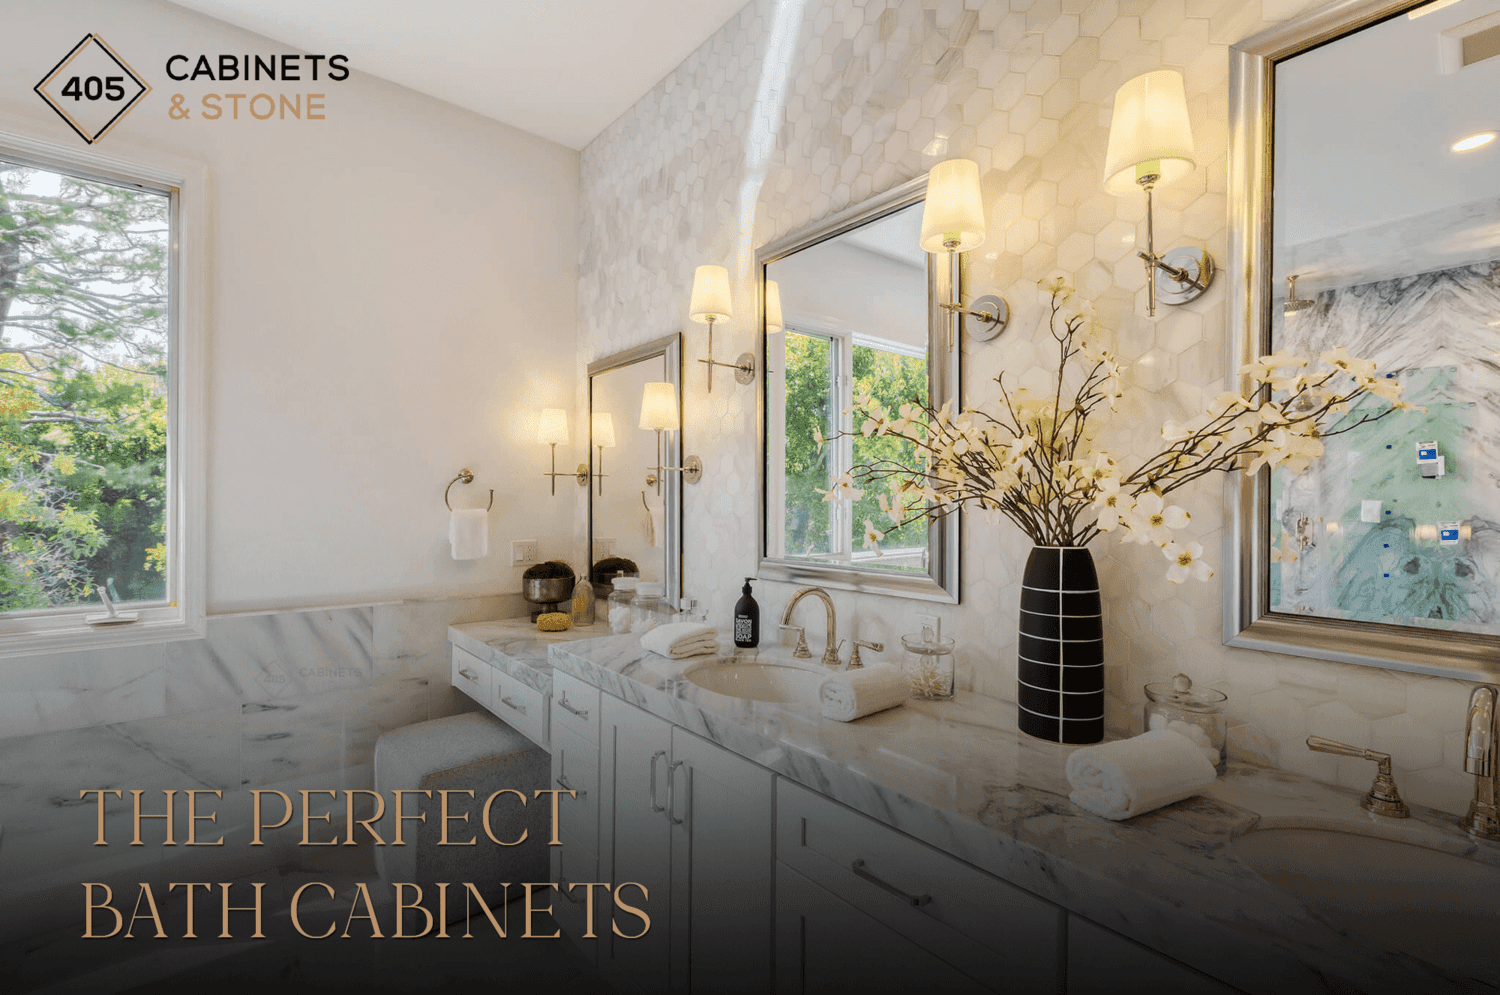 Tips for Selecting The Perfect Bath Cabinets - 405 cabinets - 1